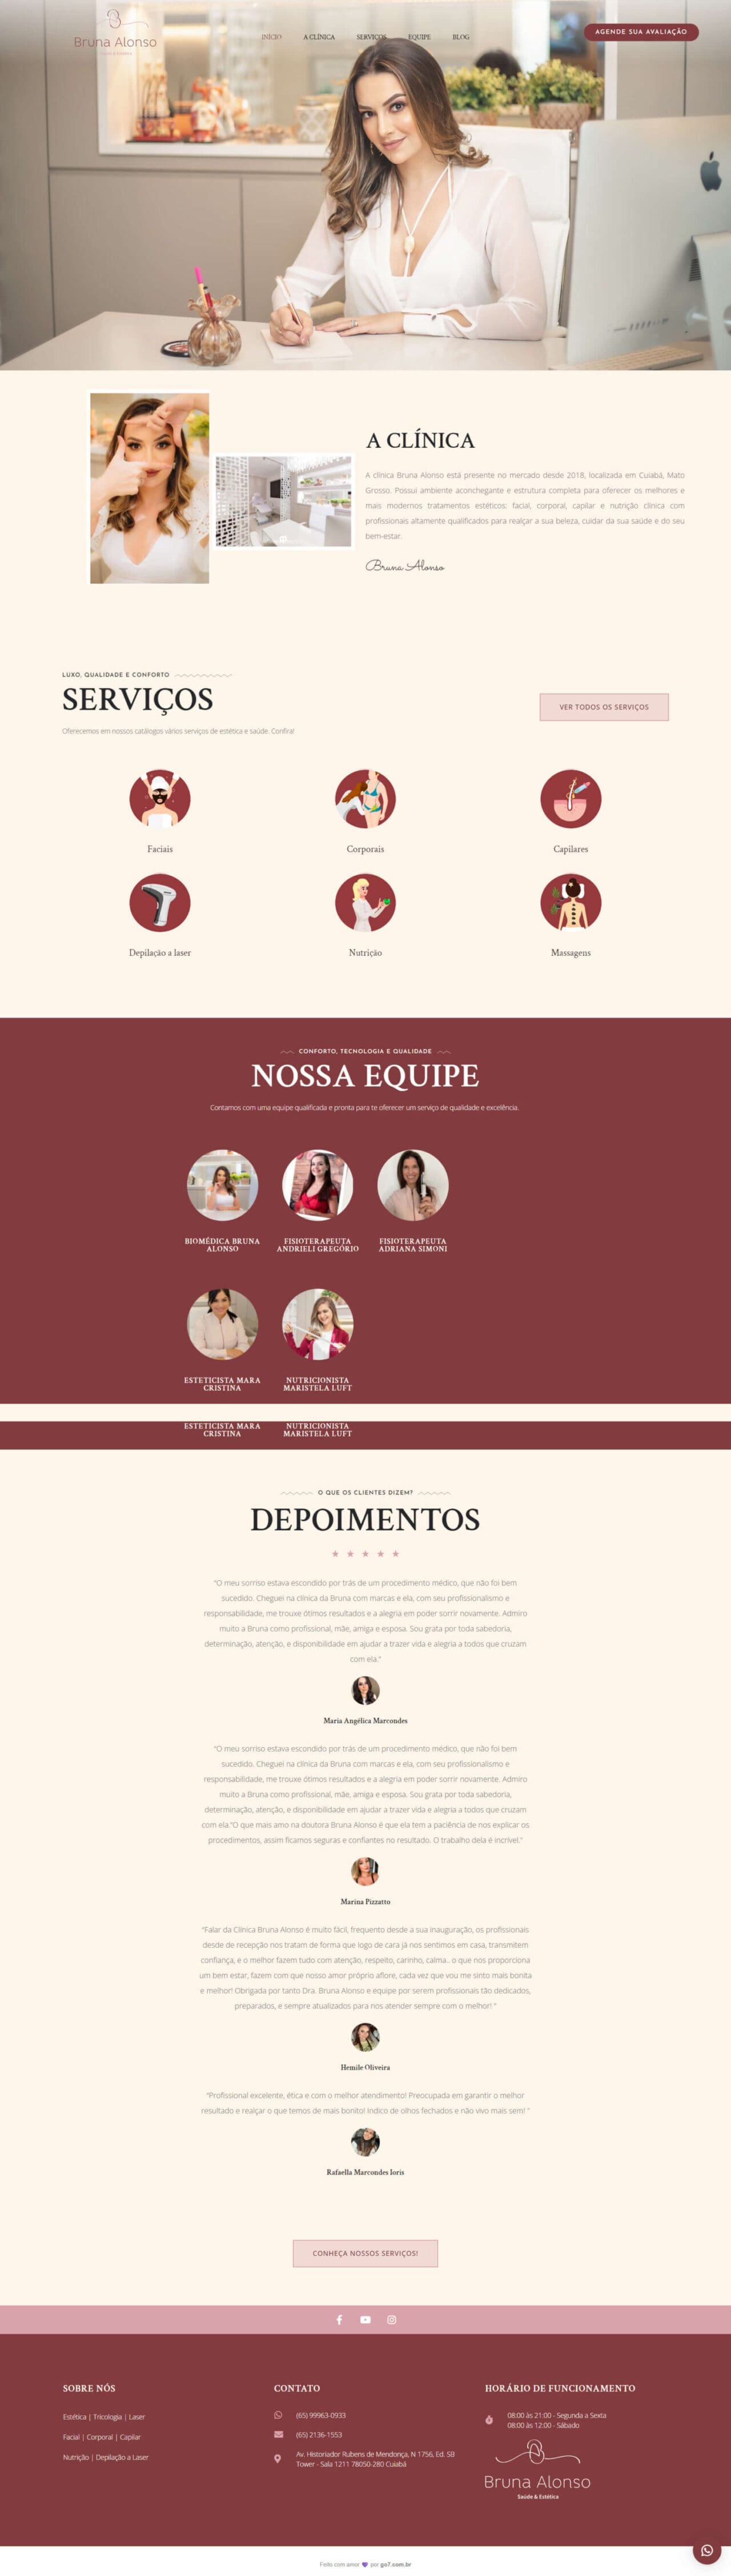 bruna alonso site completo scaled